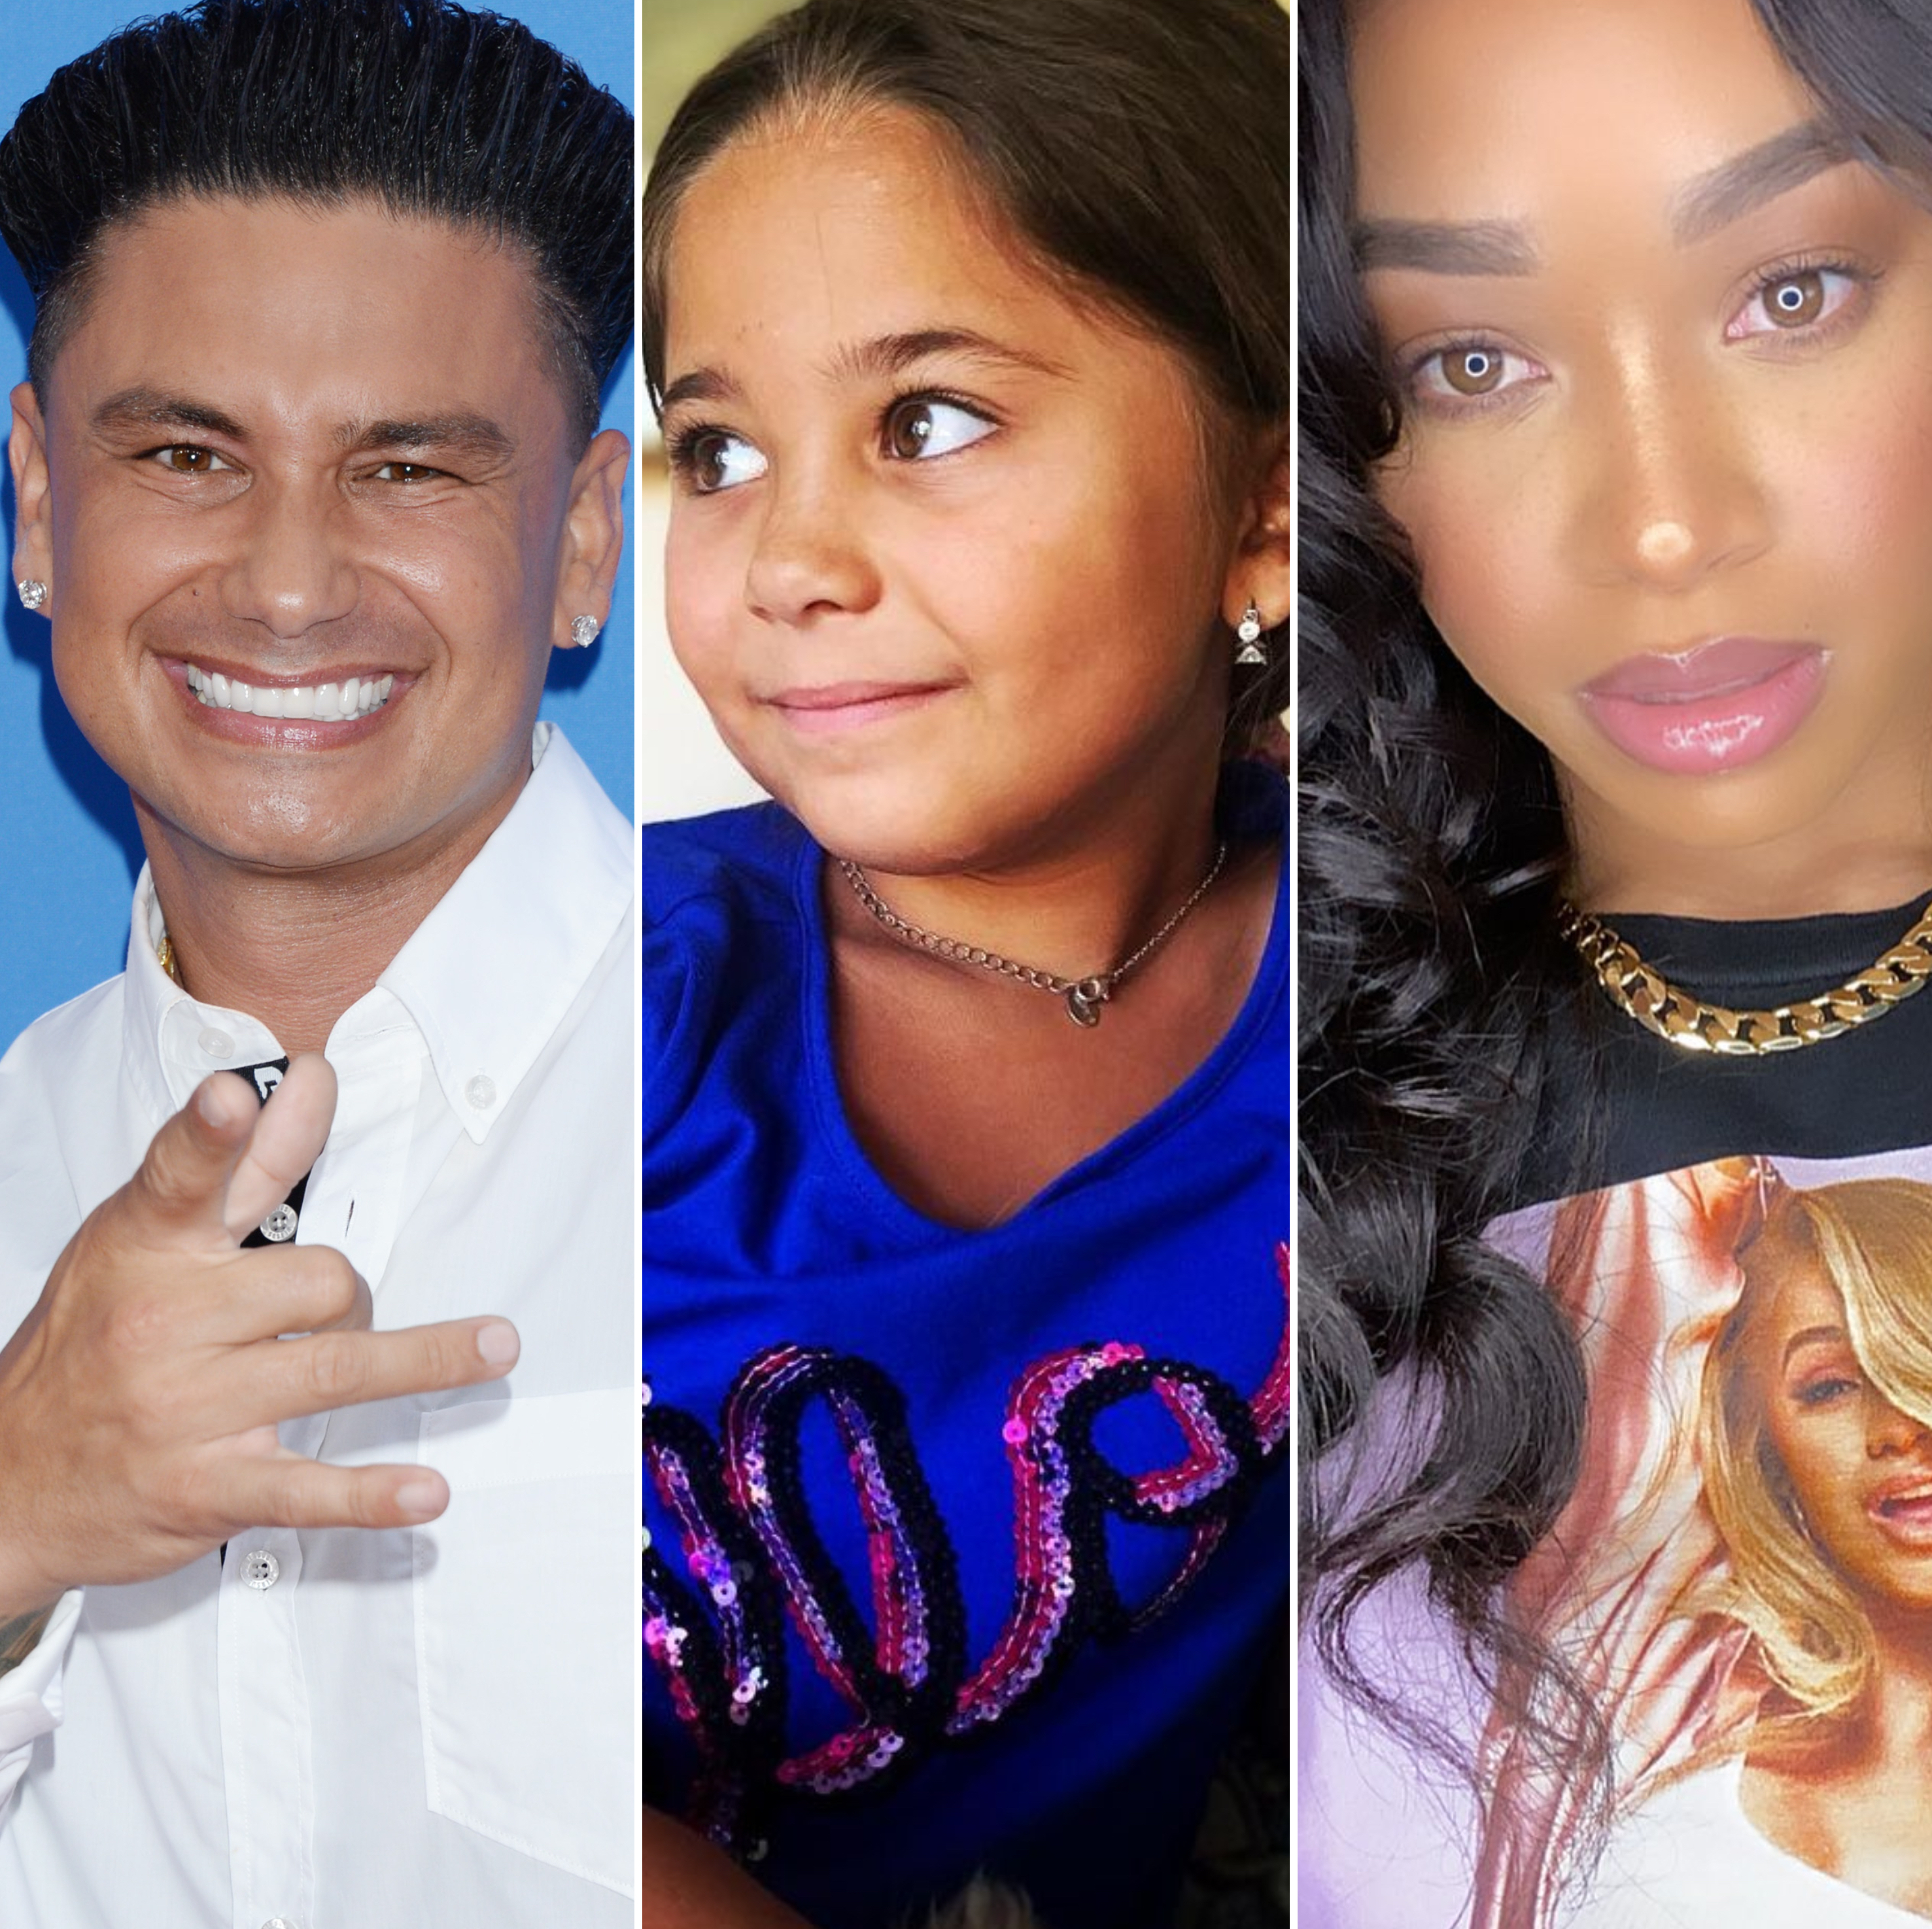 The Truth About Pauly D's Relationship With His Daughter Amabella